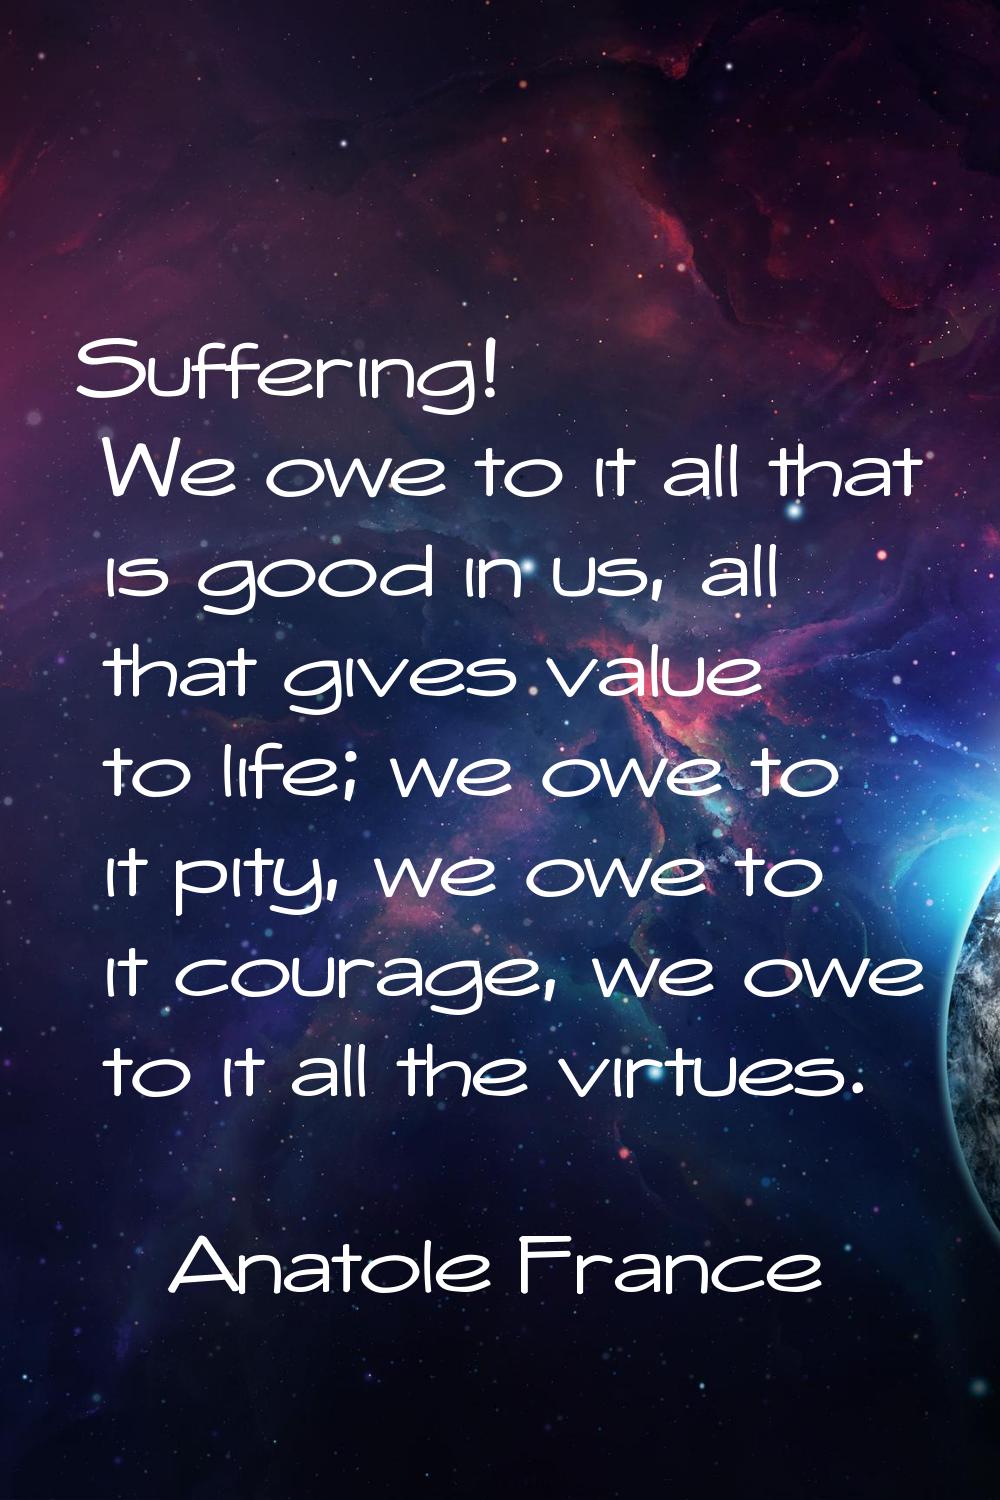 Suffering! We owe to it all that is good in us, all that gives value to life; we owe to it pity, we